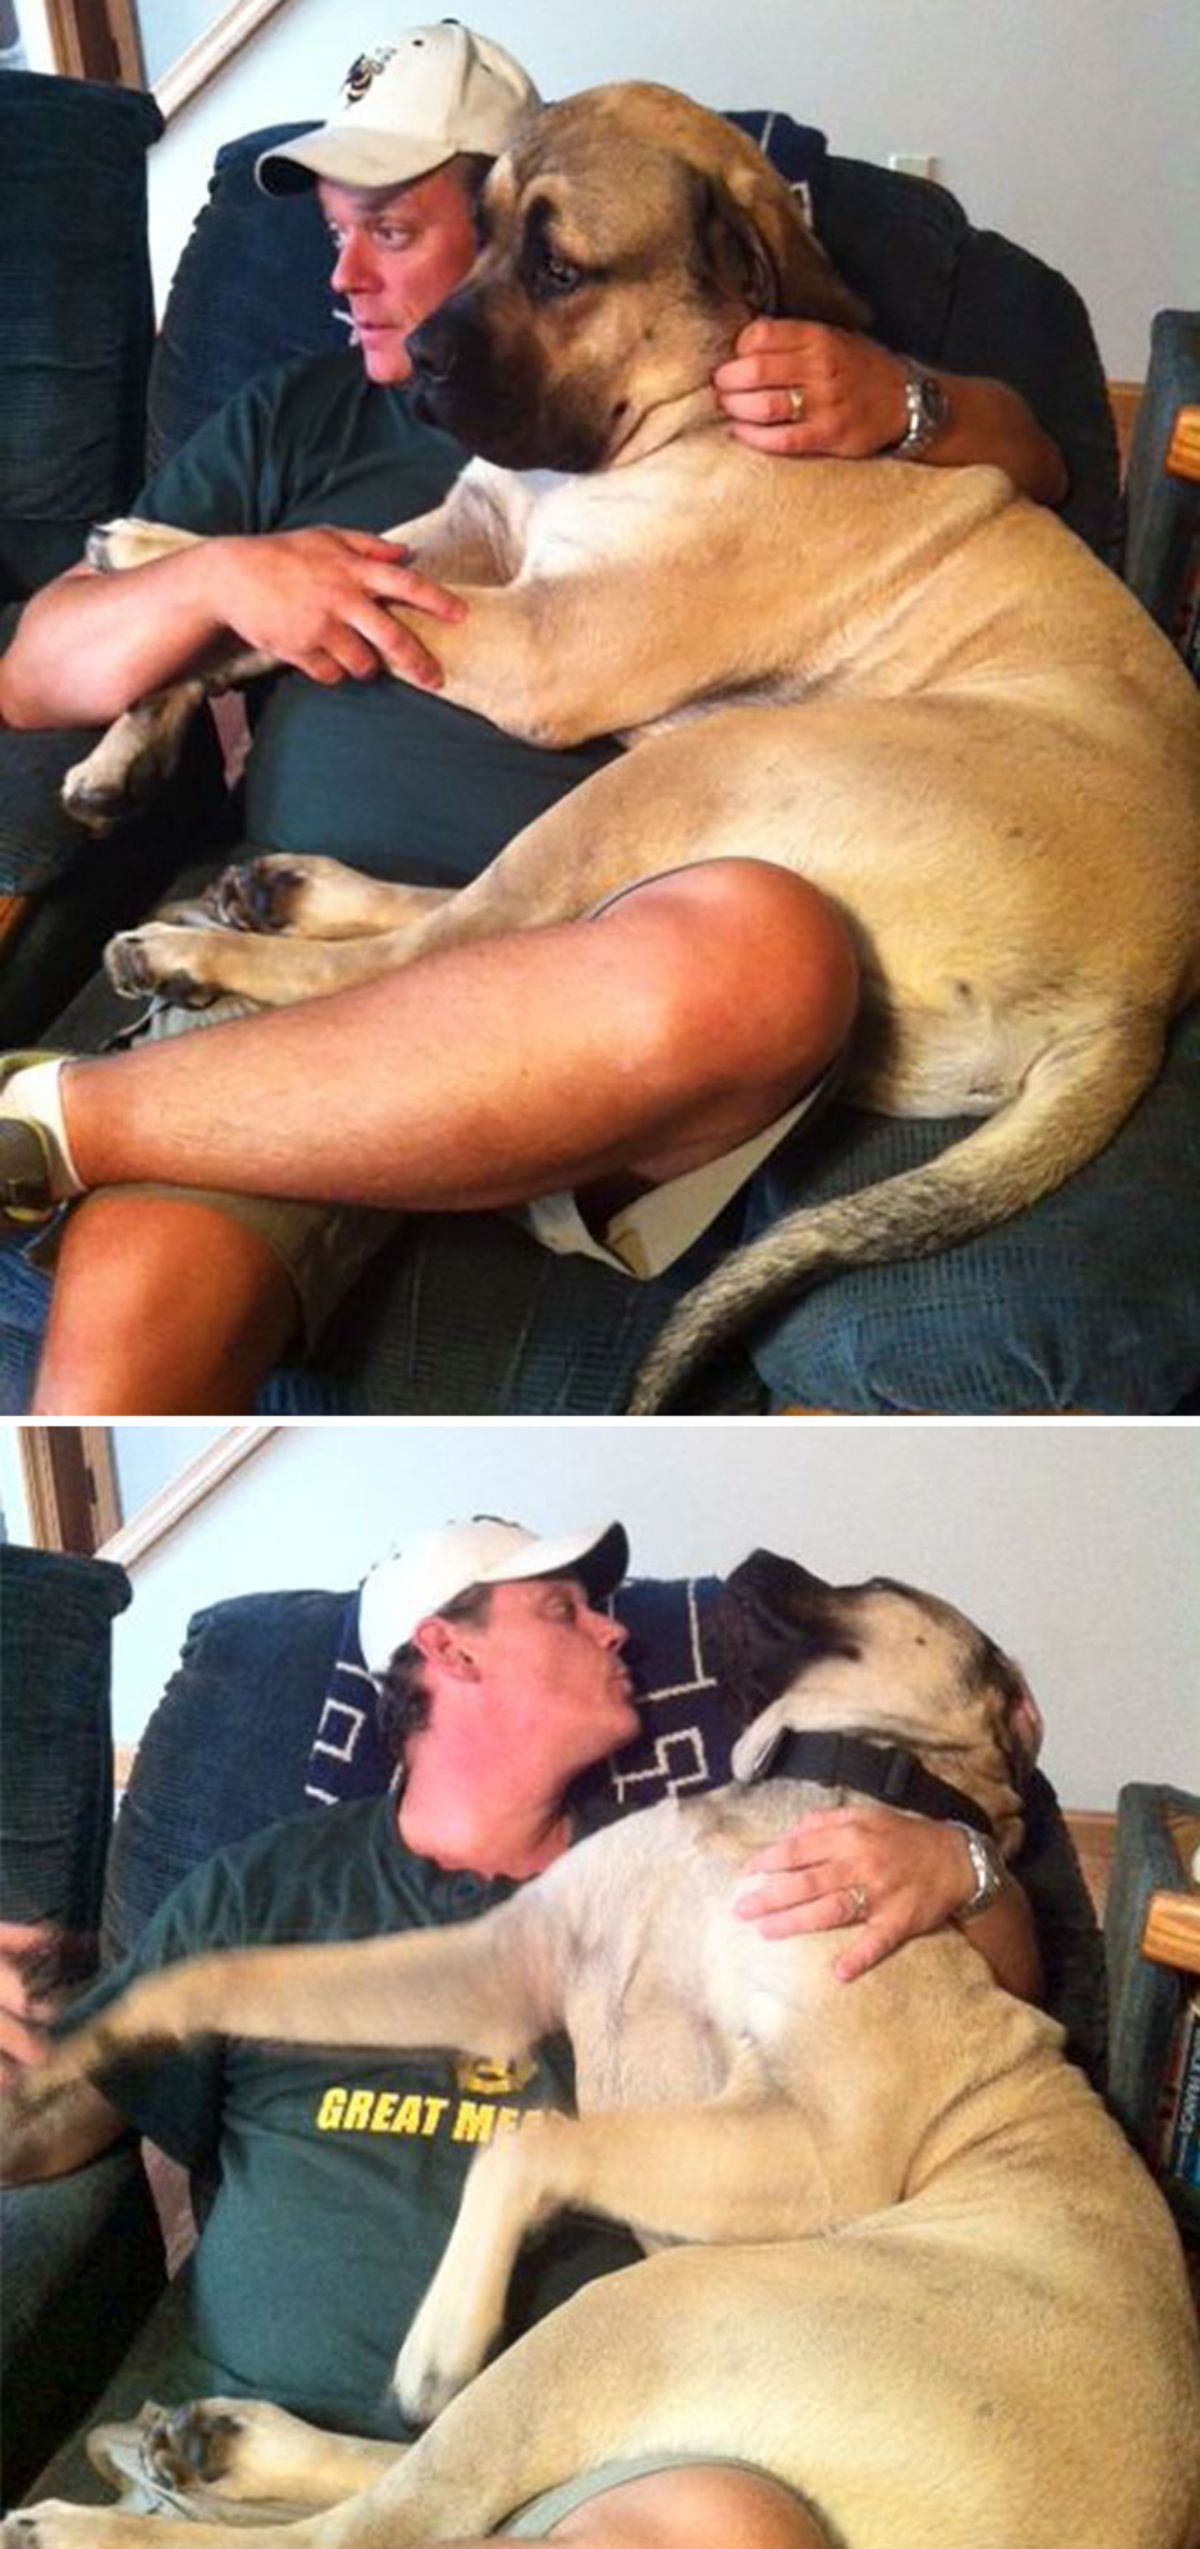 2 photos of a brown mastiff puppy laying on a man and being held